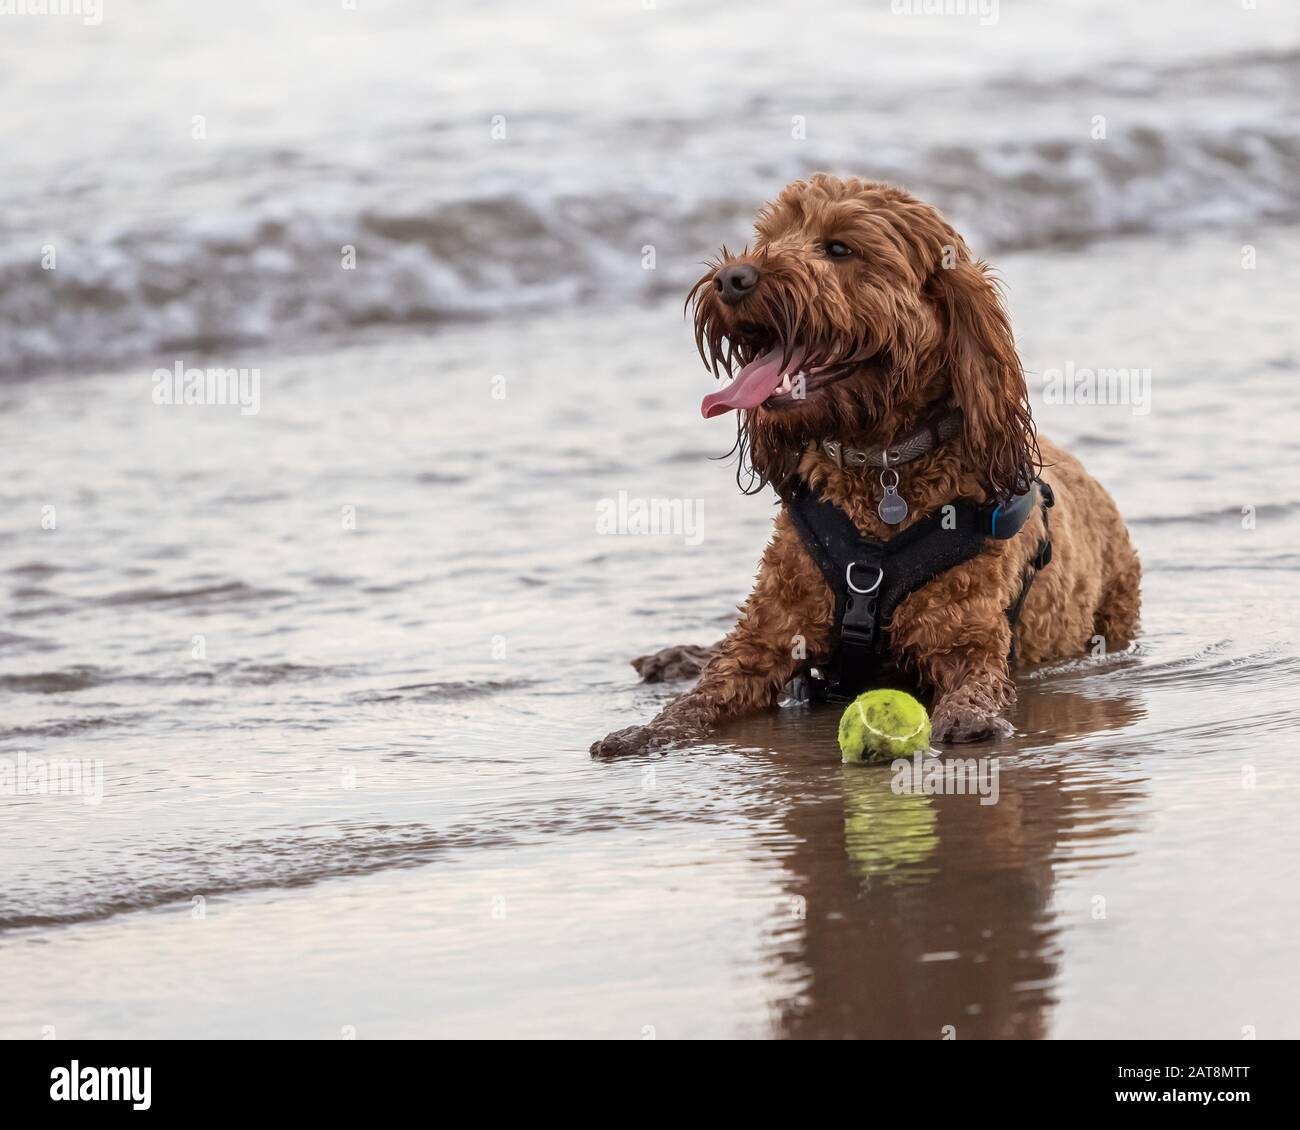 Muddy Dog Face High Resolution Stock Photography and Images - Alamy